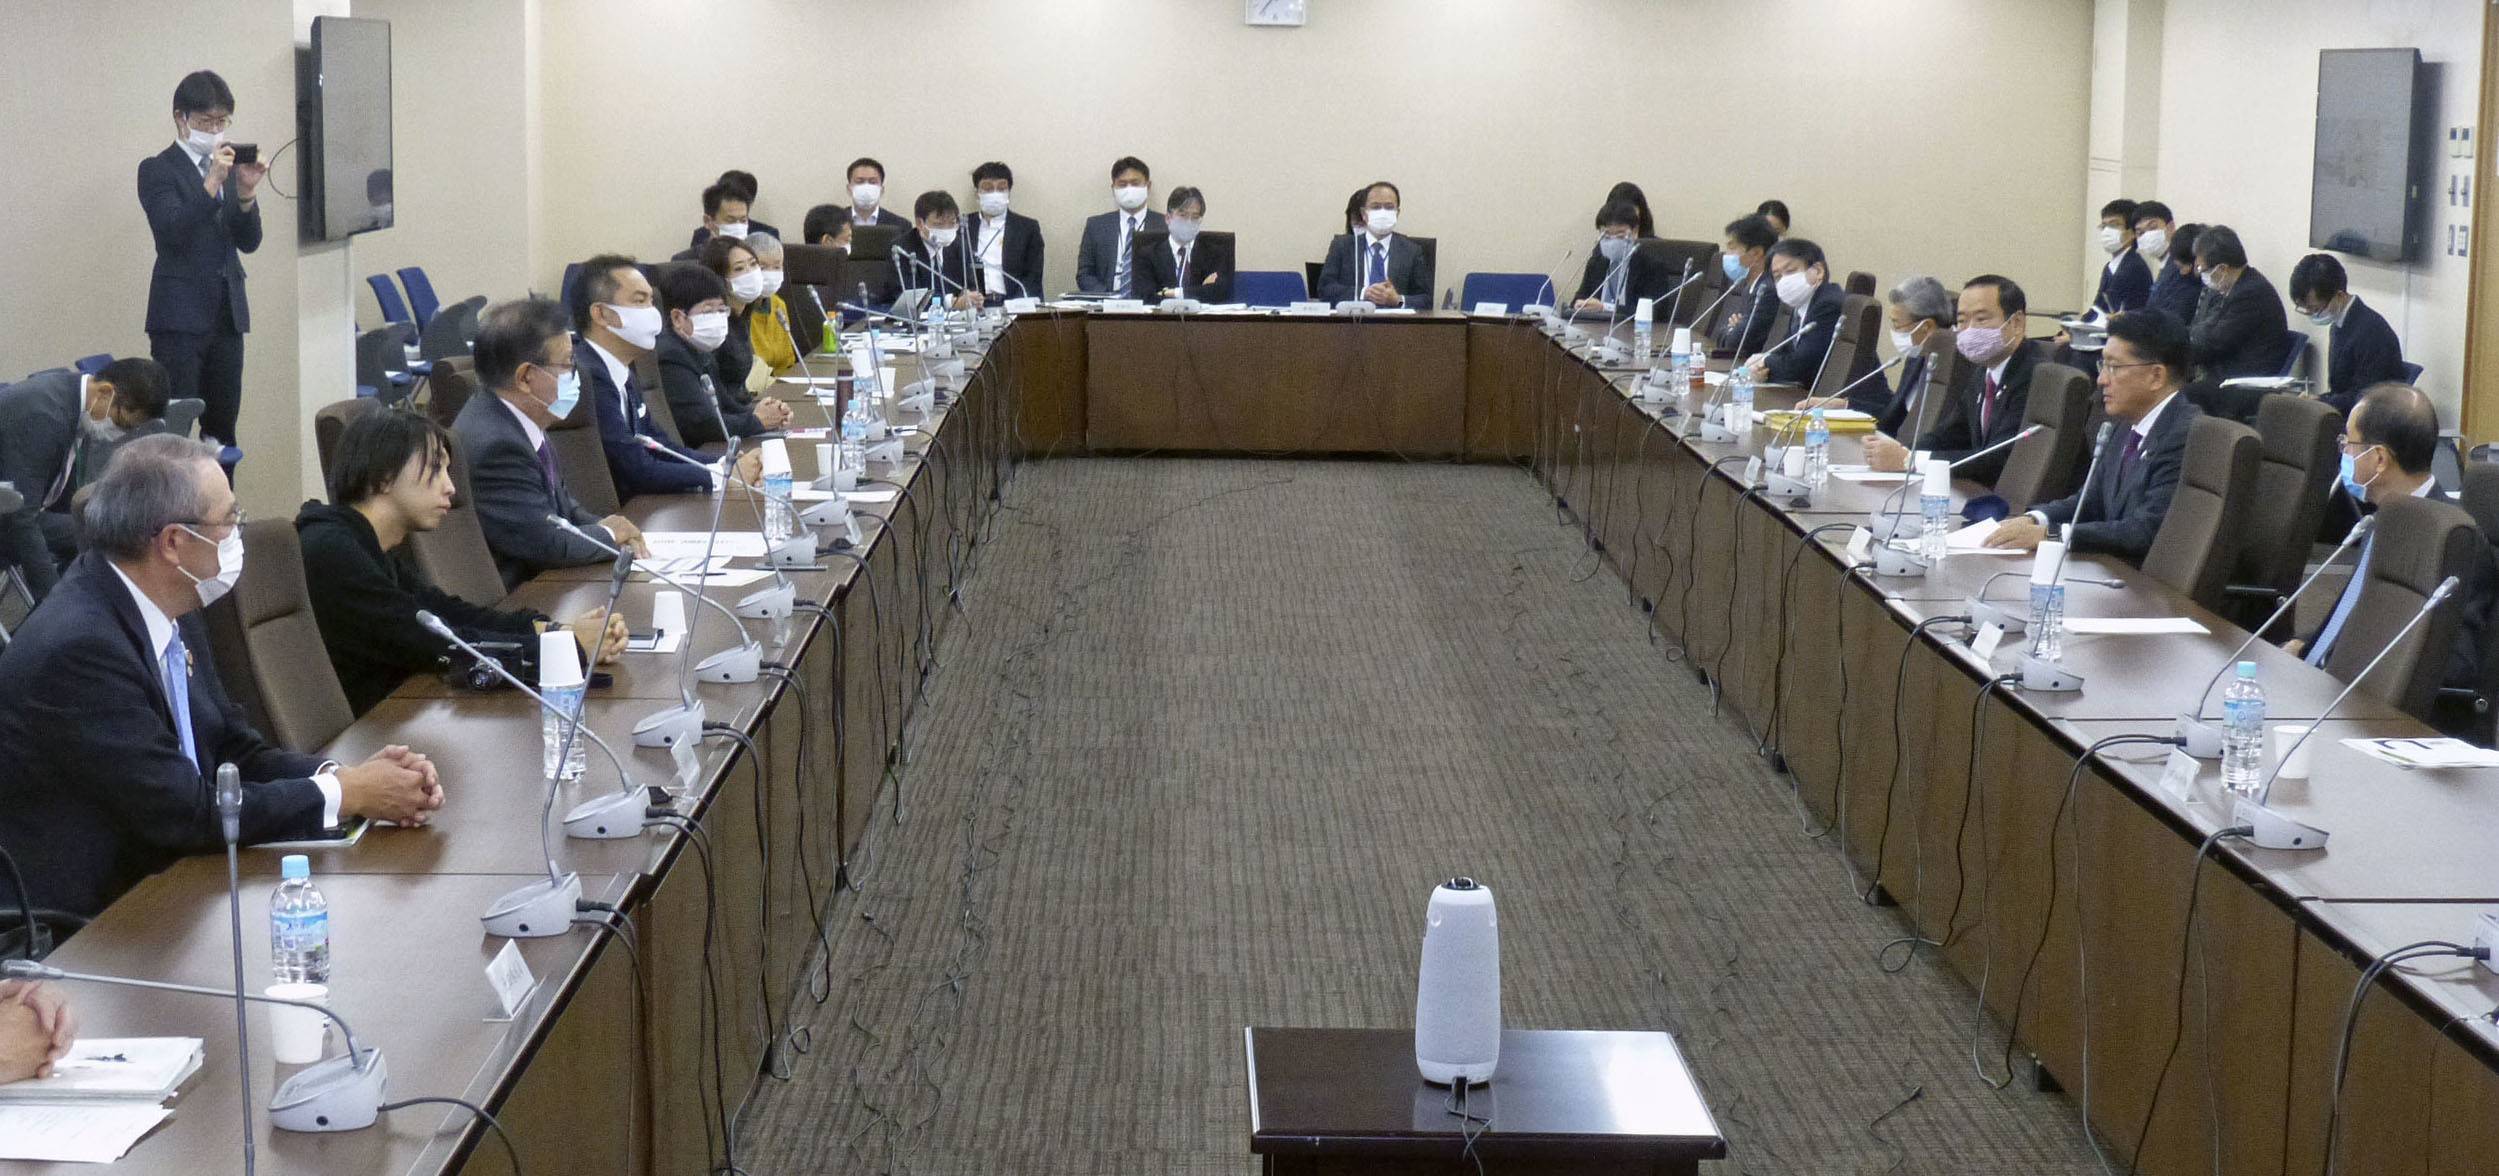 Ahead of the establishment of a digital agency, the government has held meetings with experts knowledgeable on the matter. | KYODO 